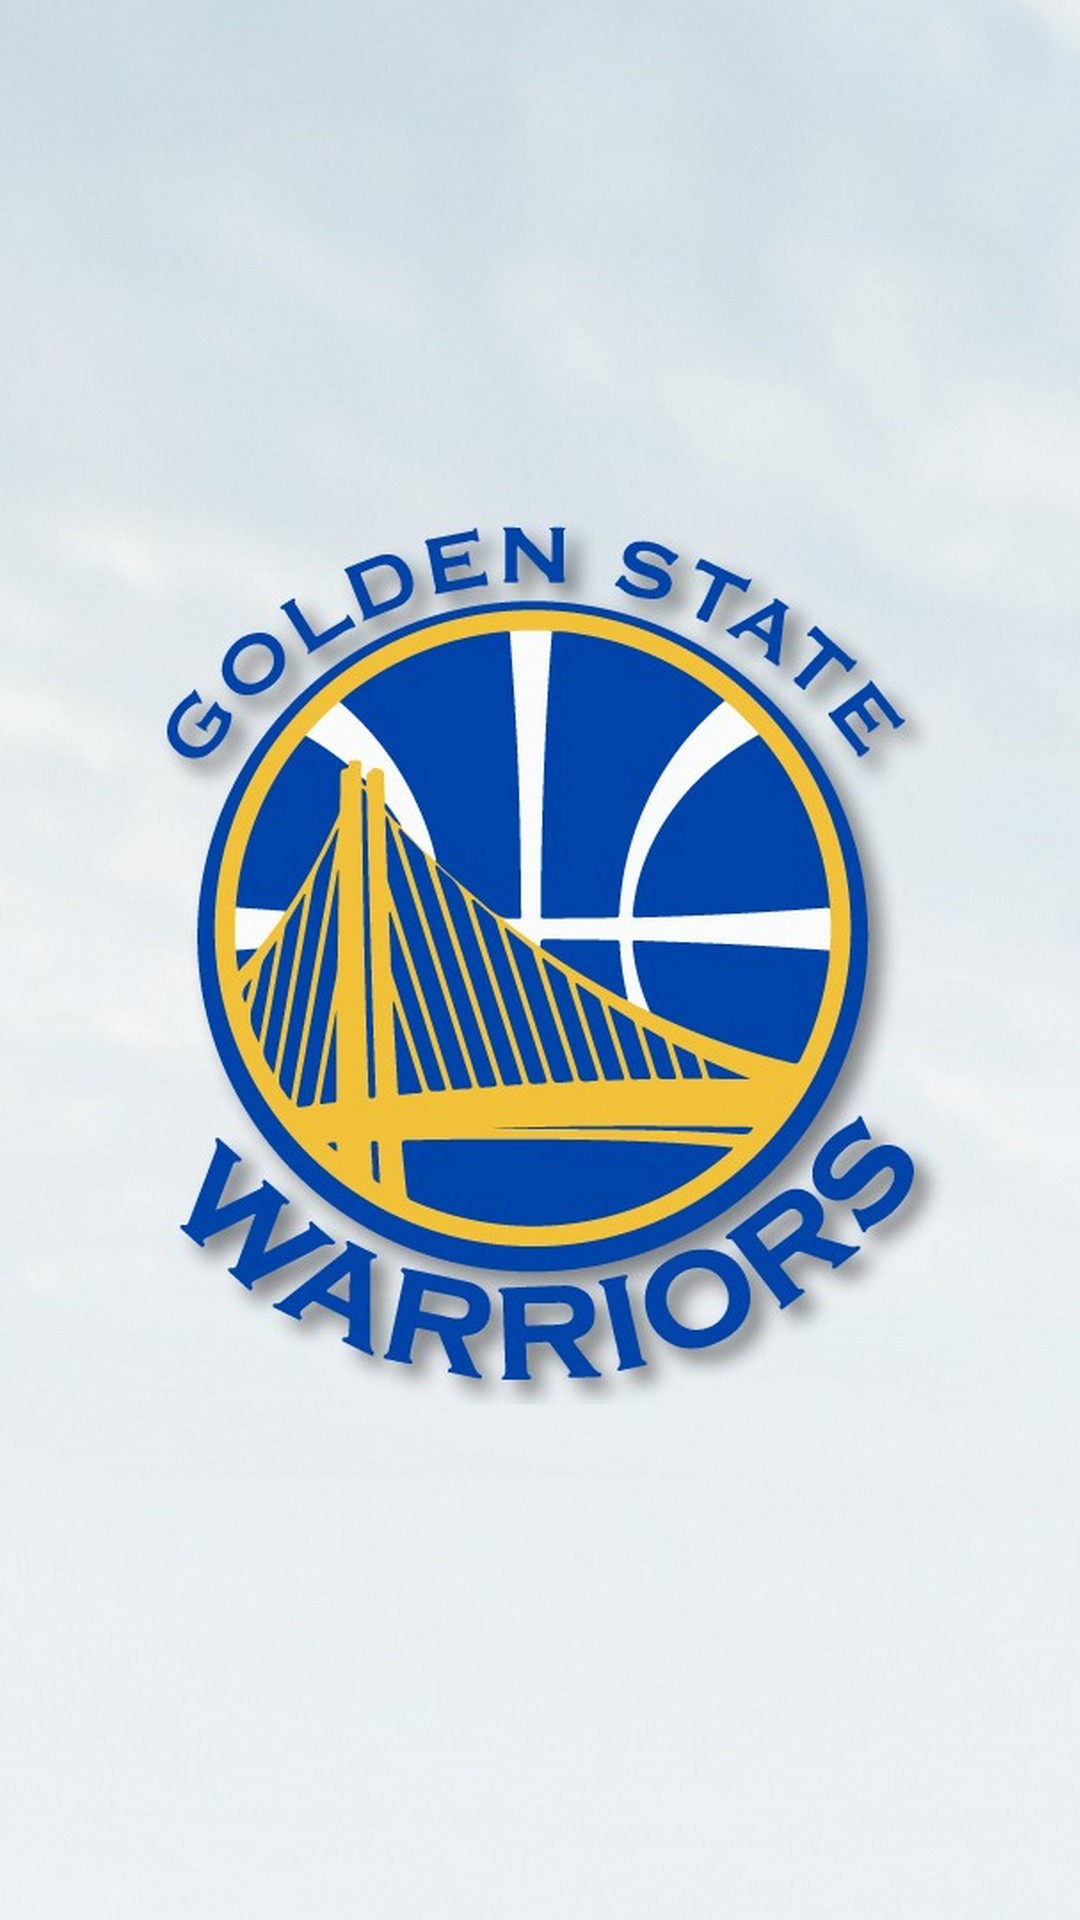 Golden State Warriors iPhone X Wallpaper with resolution 1080X1920 pixel. You can use this wallpaper as background for your desktop Computer Screensavers, Android or iPhone smartphones